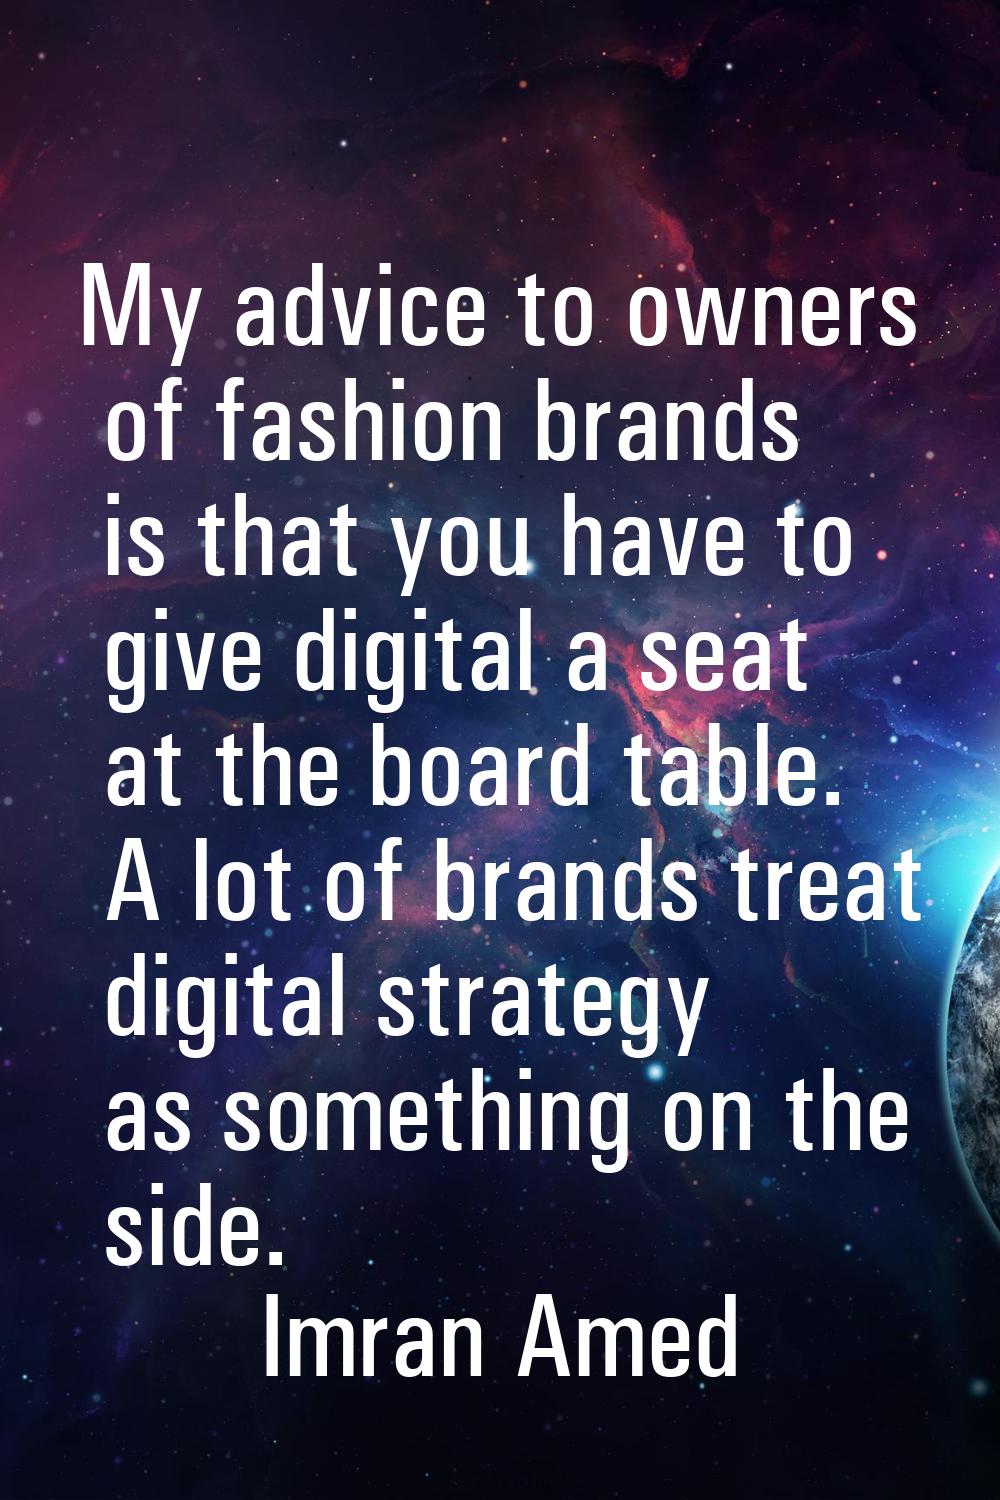 My advice to owners of fashion brands is that you have to give digital a seat at the board table. A